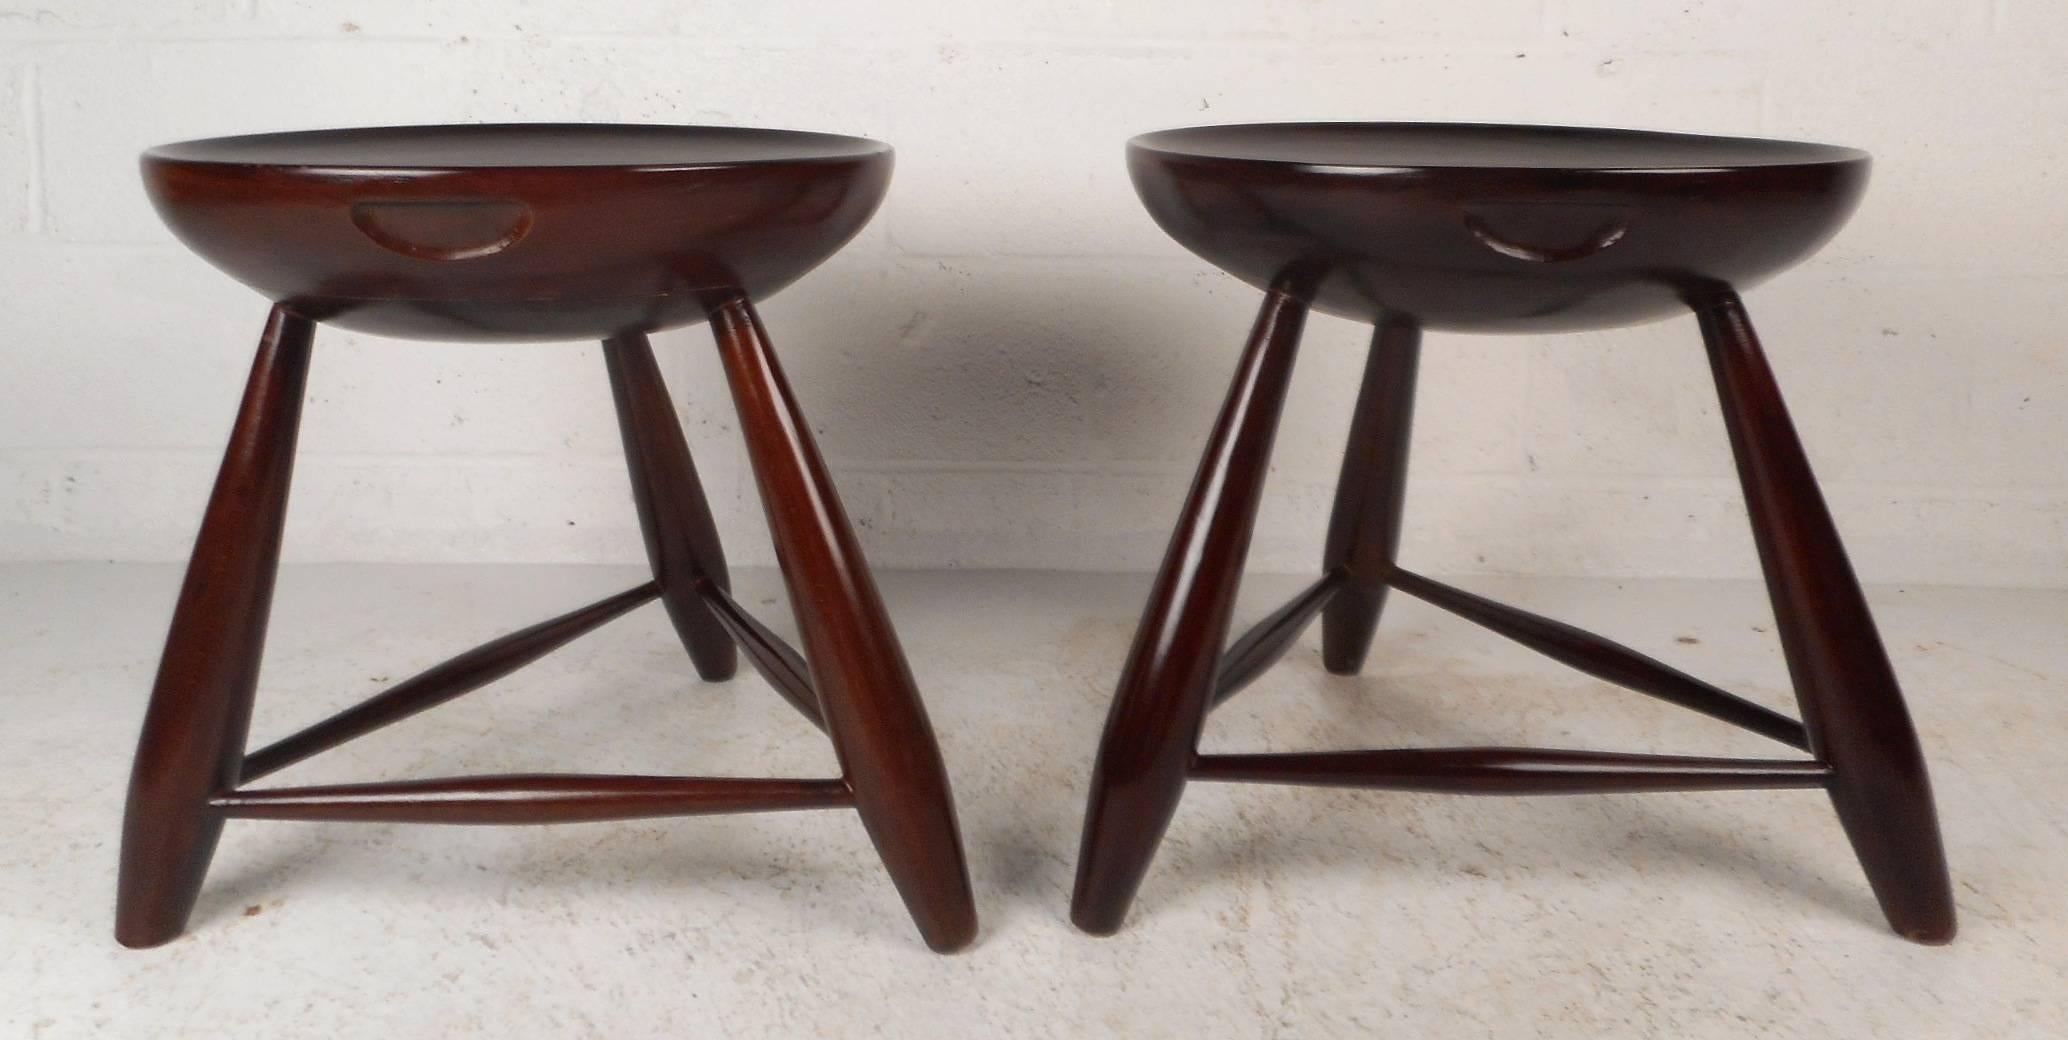 This stunning pair of vintage modern end tables feature unique round tops with smooth raised edges. The unique design has three splayed legs tied together by stretchers ensuring sturdiness. Versatile design with gorgeous wood grain can be used as